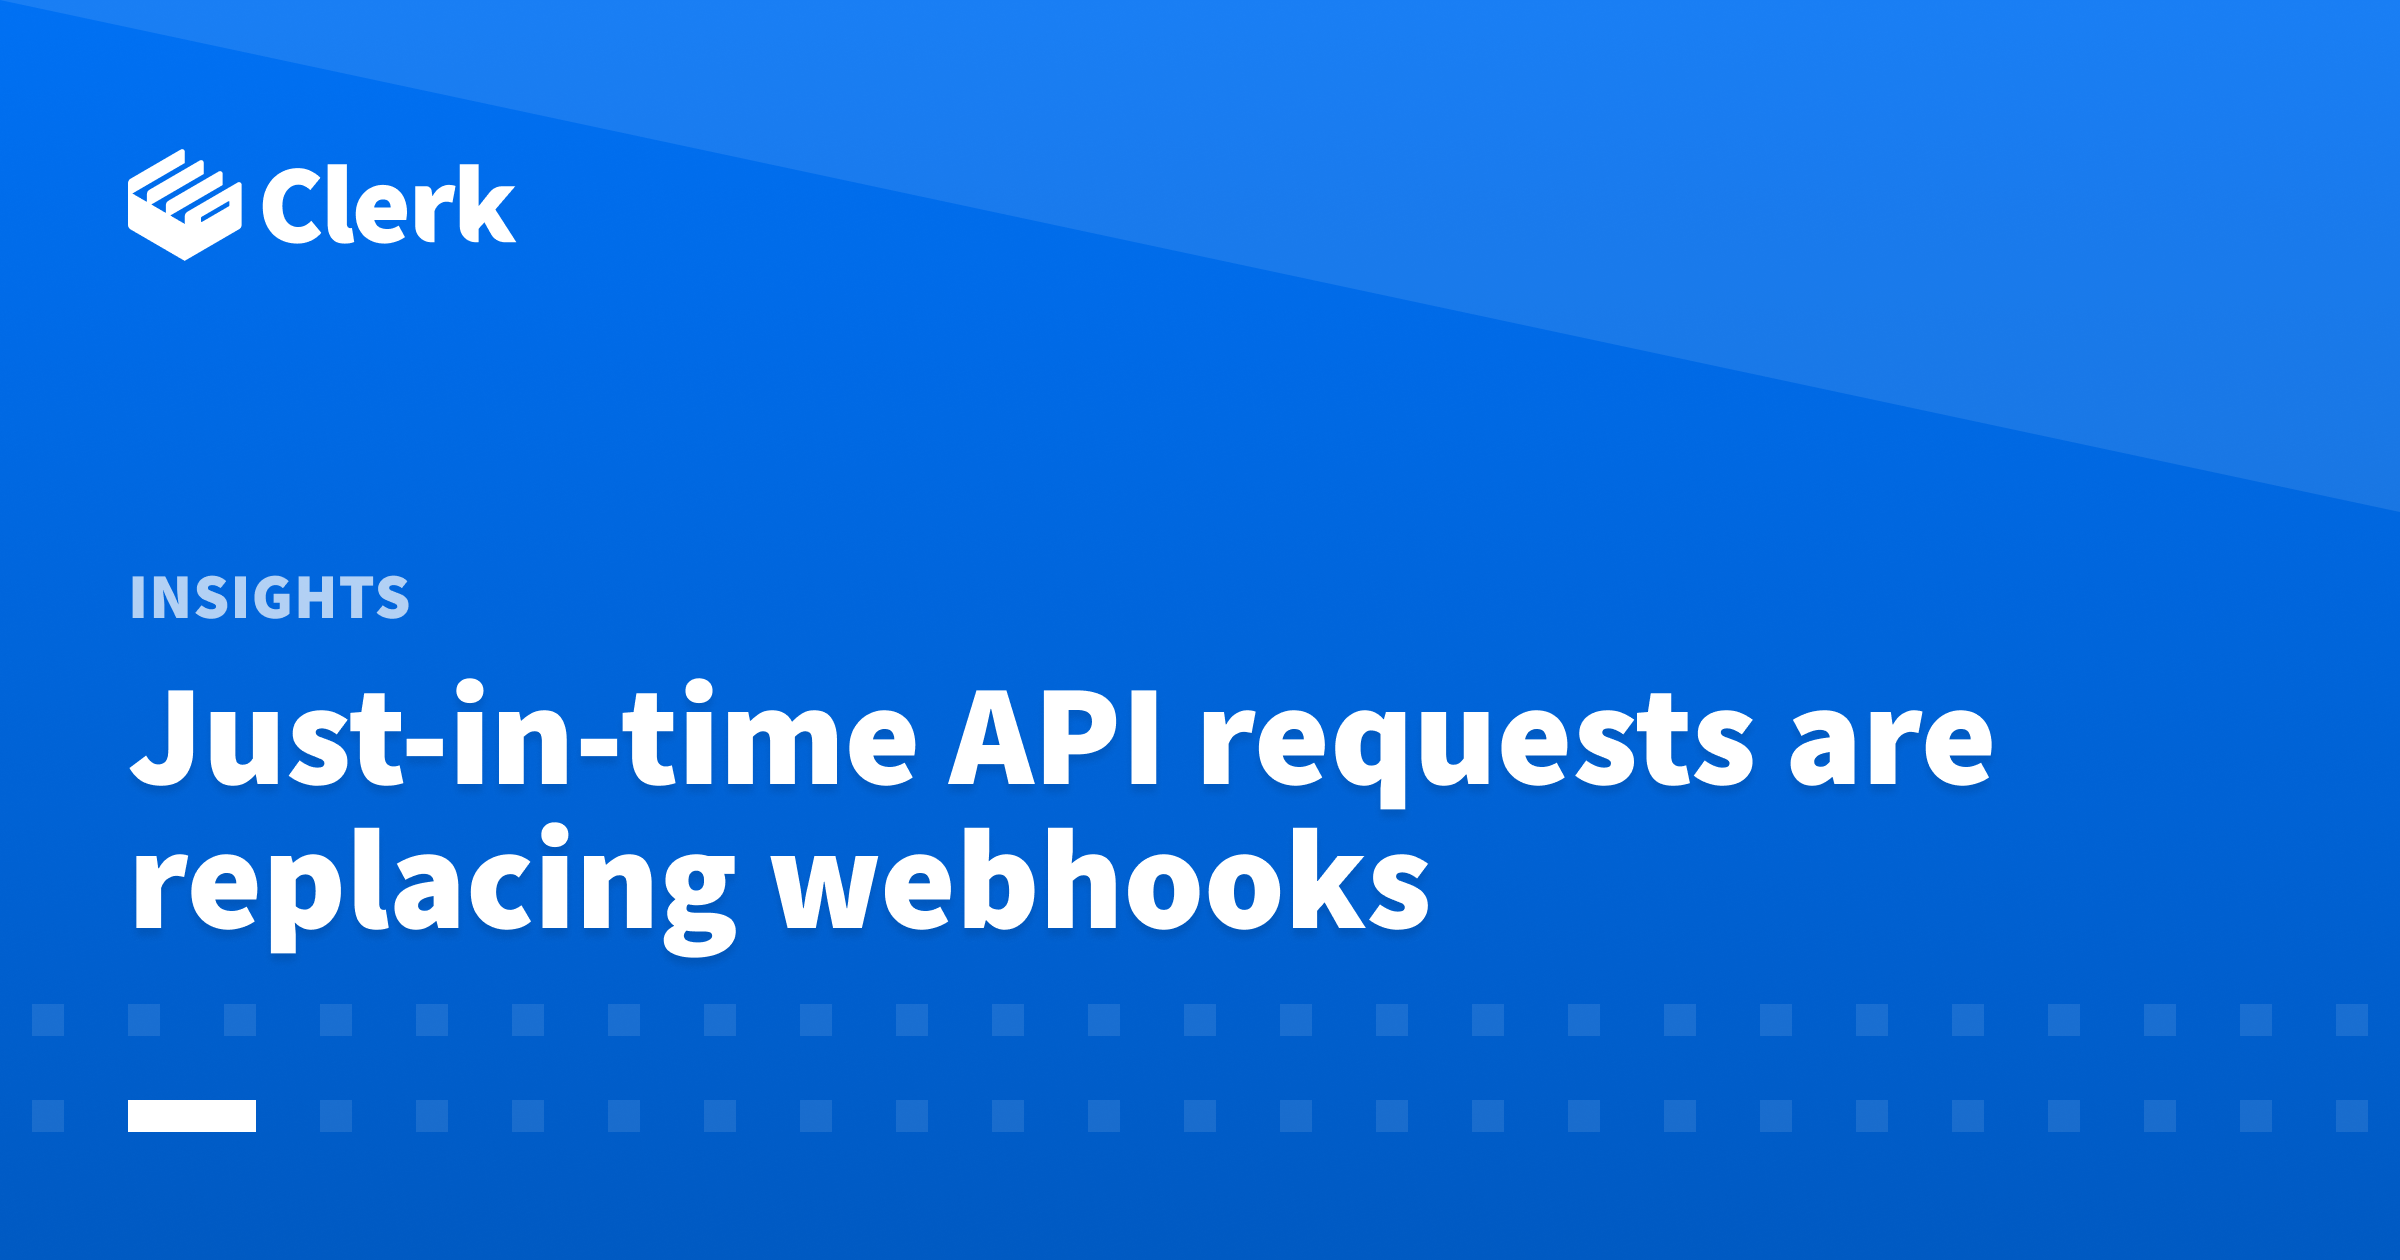 Just-in-time API requests are replacing webhooks